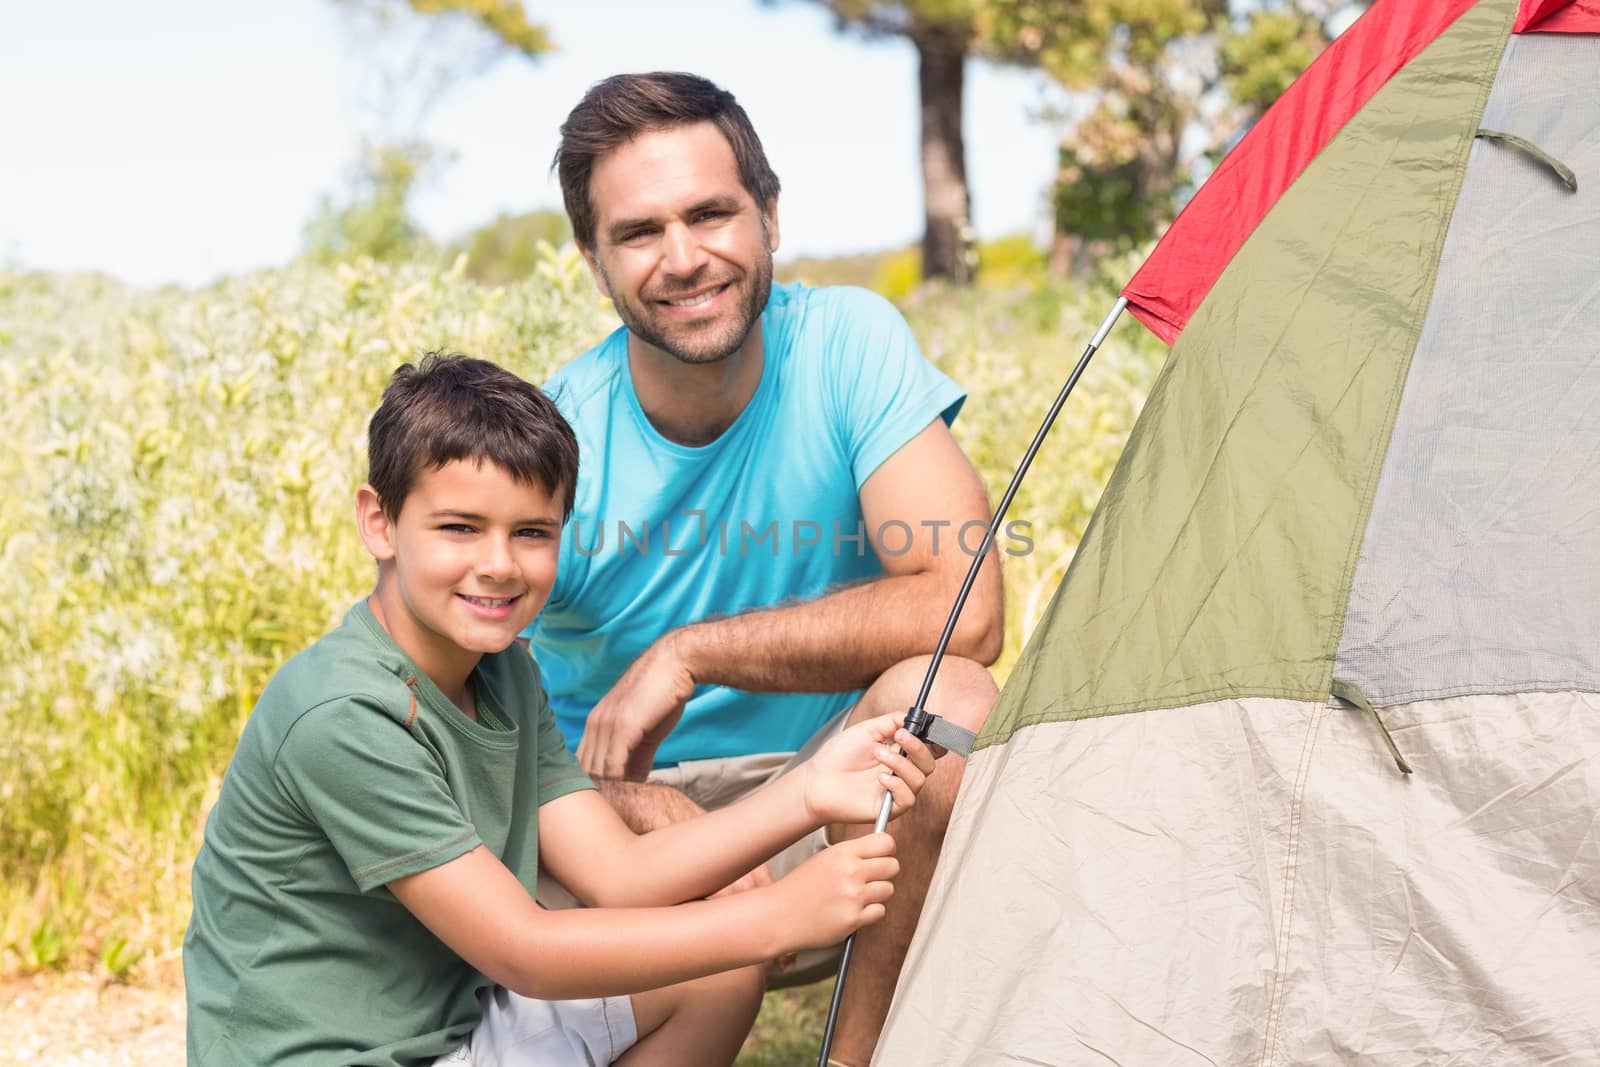 Father and son pitching their tent on a sunny day